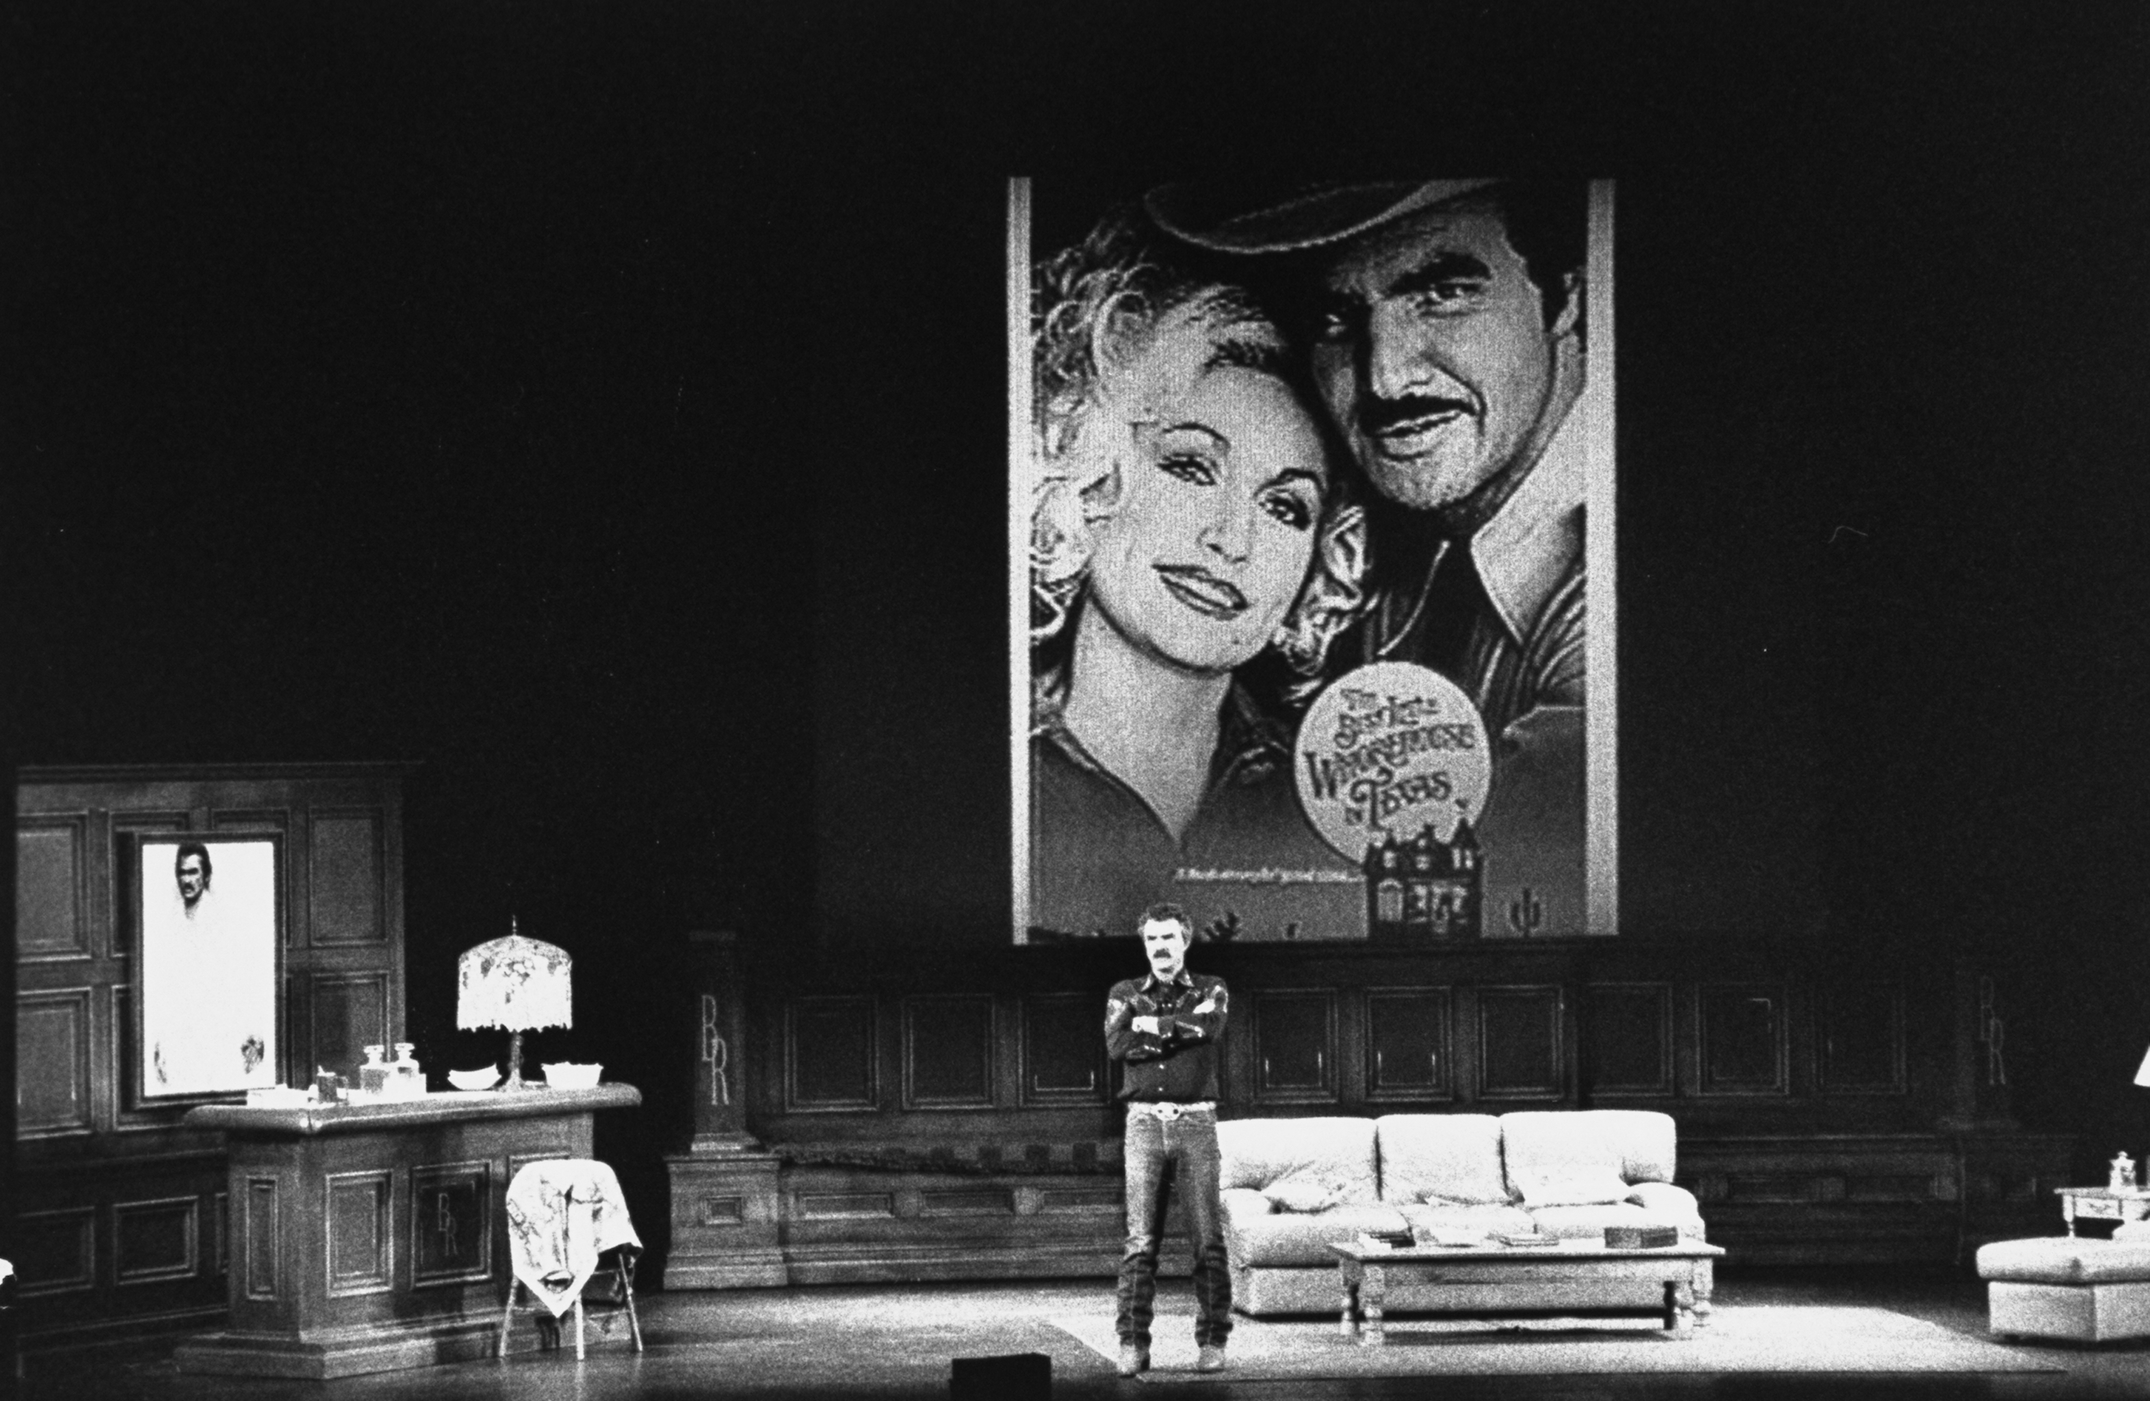 Burt Reynolds talking on stage with an image of him and Dolly Parton